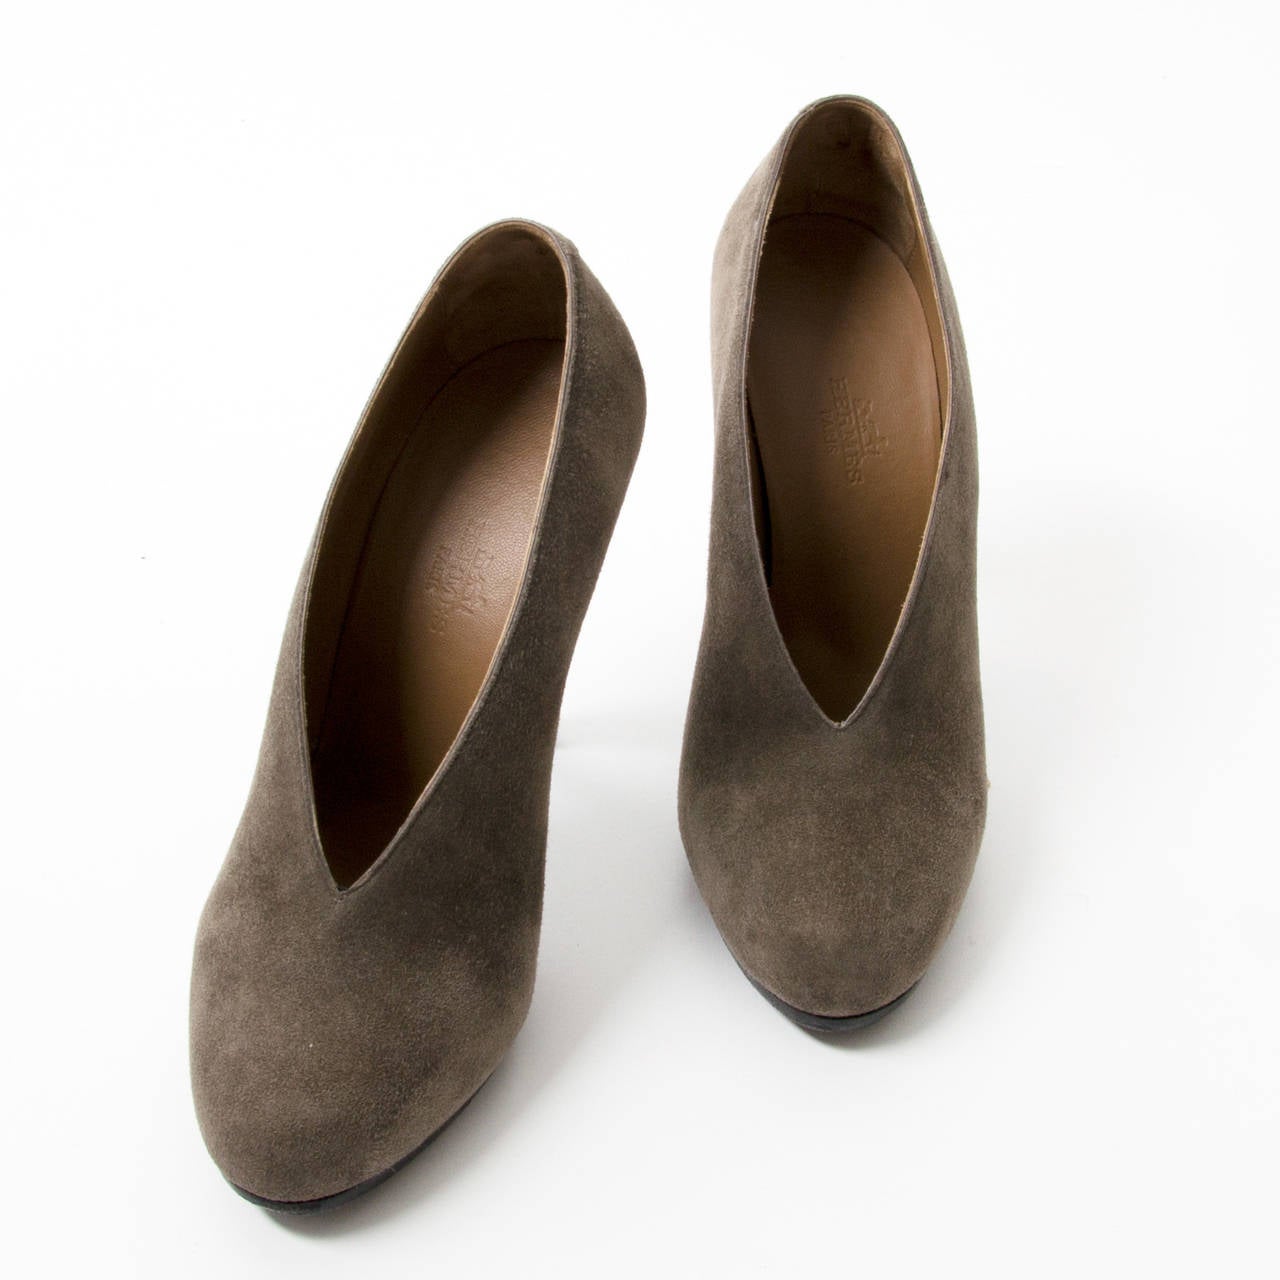 The products of the house of Hermès are known for their superior quality and craftsmanship. This is also very noticeable when it comes to Hermès shoes. This pair of ankle pumps comes in a beautiful taupe suede material and the lining is in a very